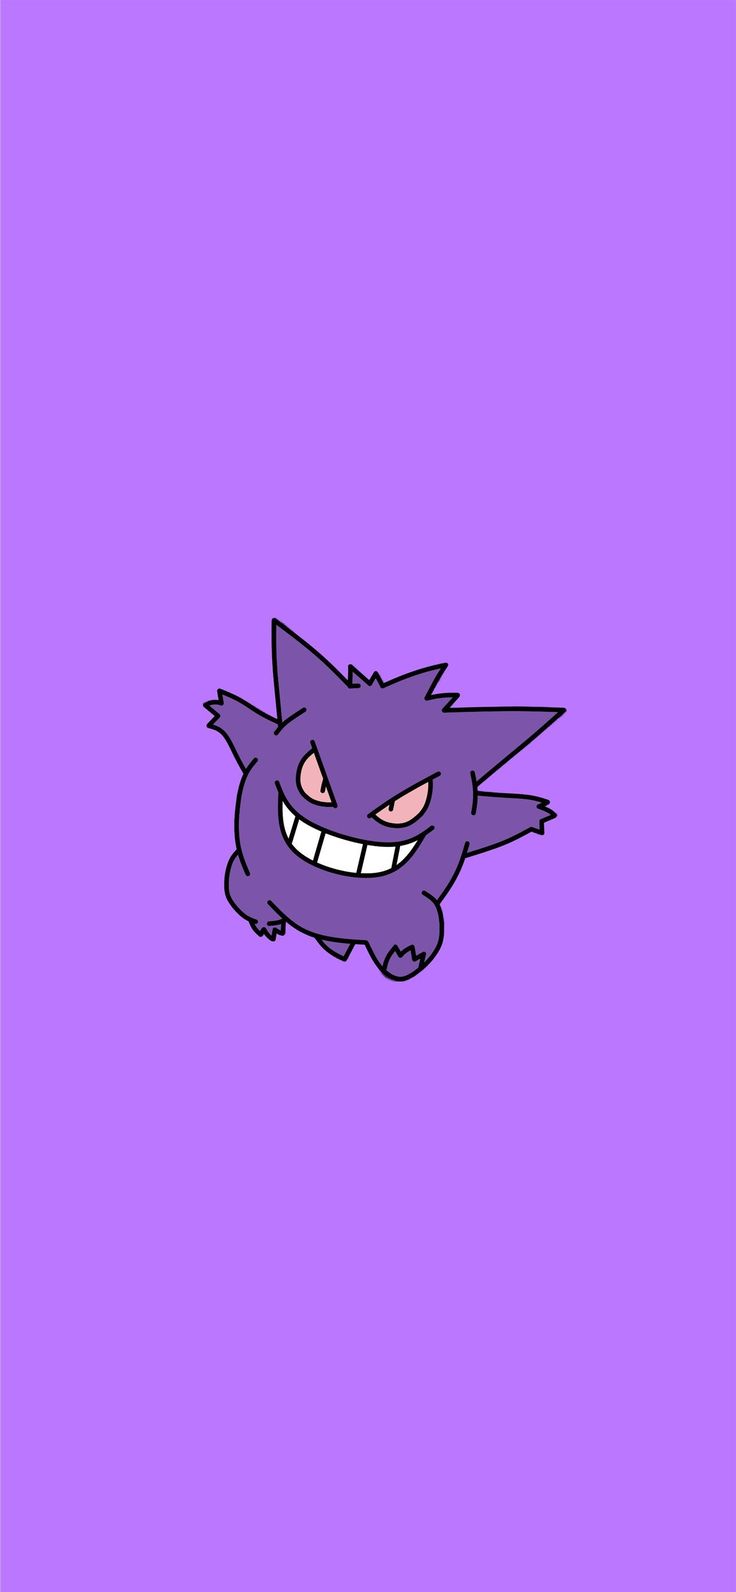 an image of a cartoon character on a purple background